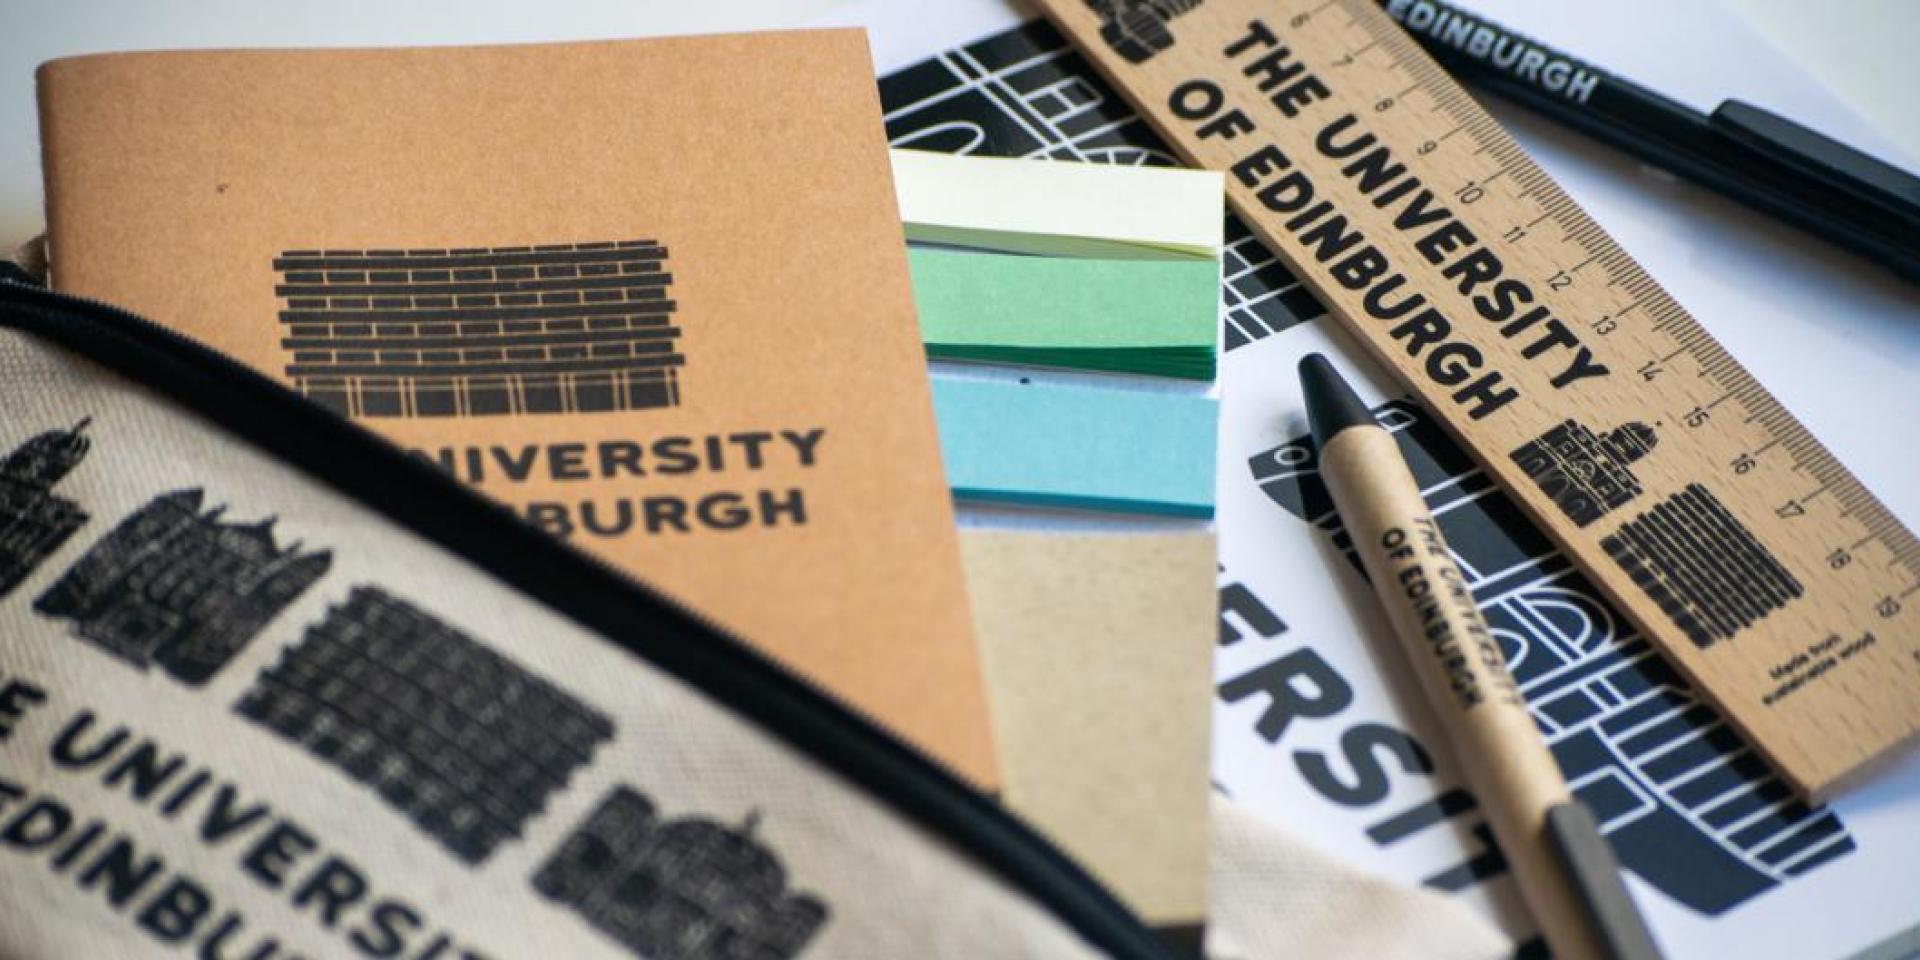 A selection of University of Edinburgh merchandise including pens, notebooks and a ruler spread across a table.